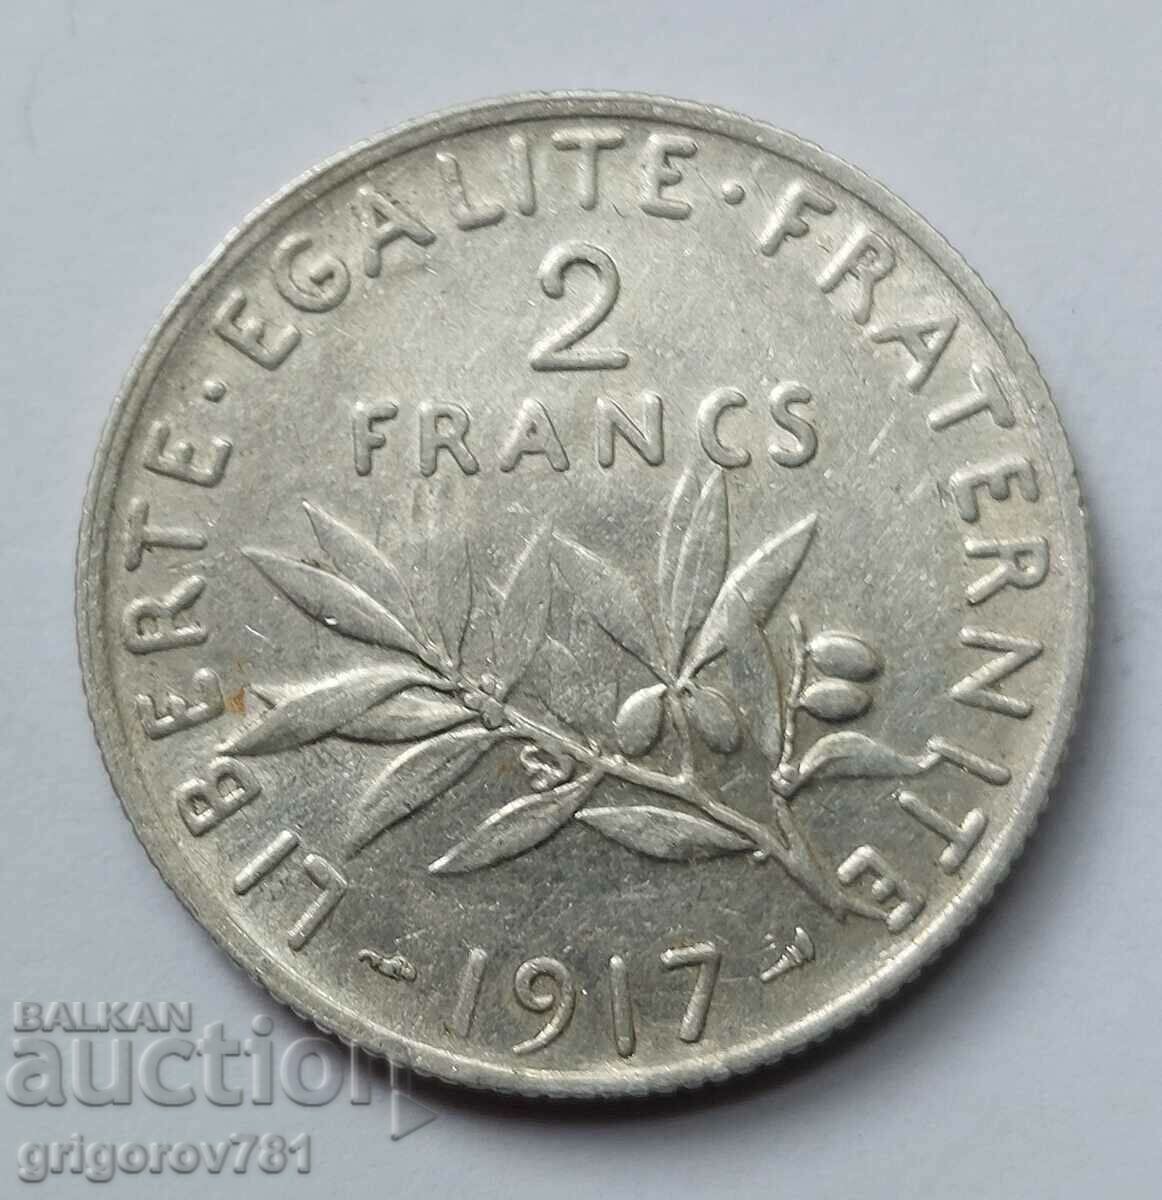 2 Francs Silver France 1917 - Silver Coin #95